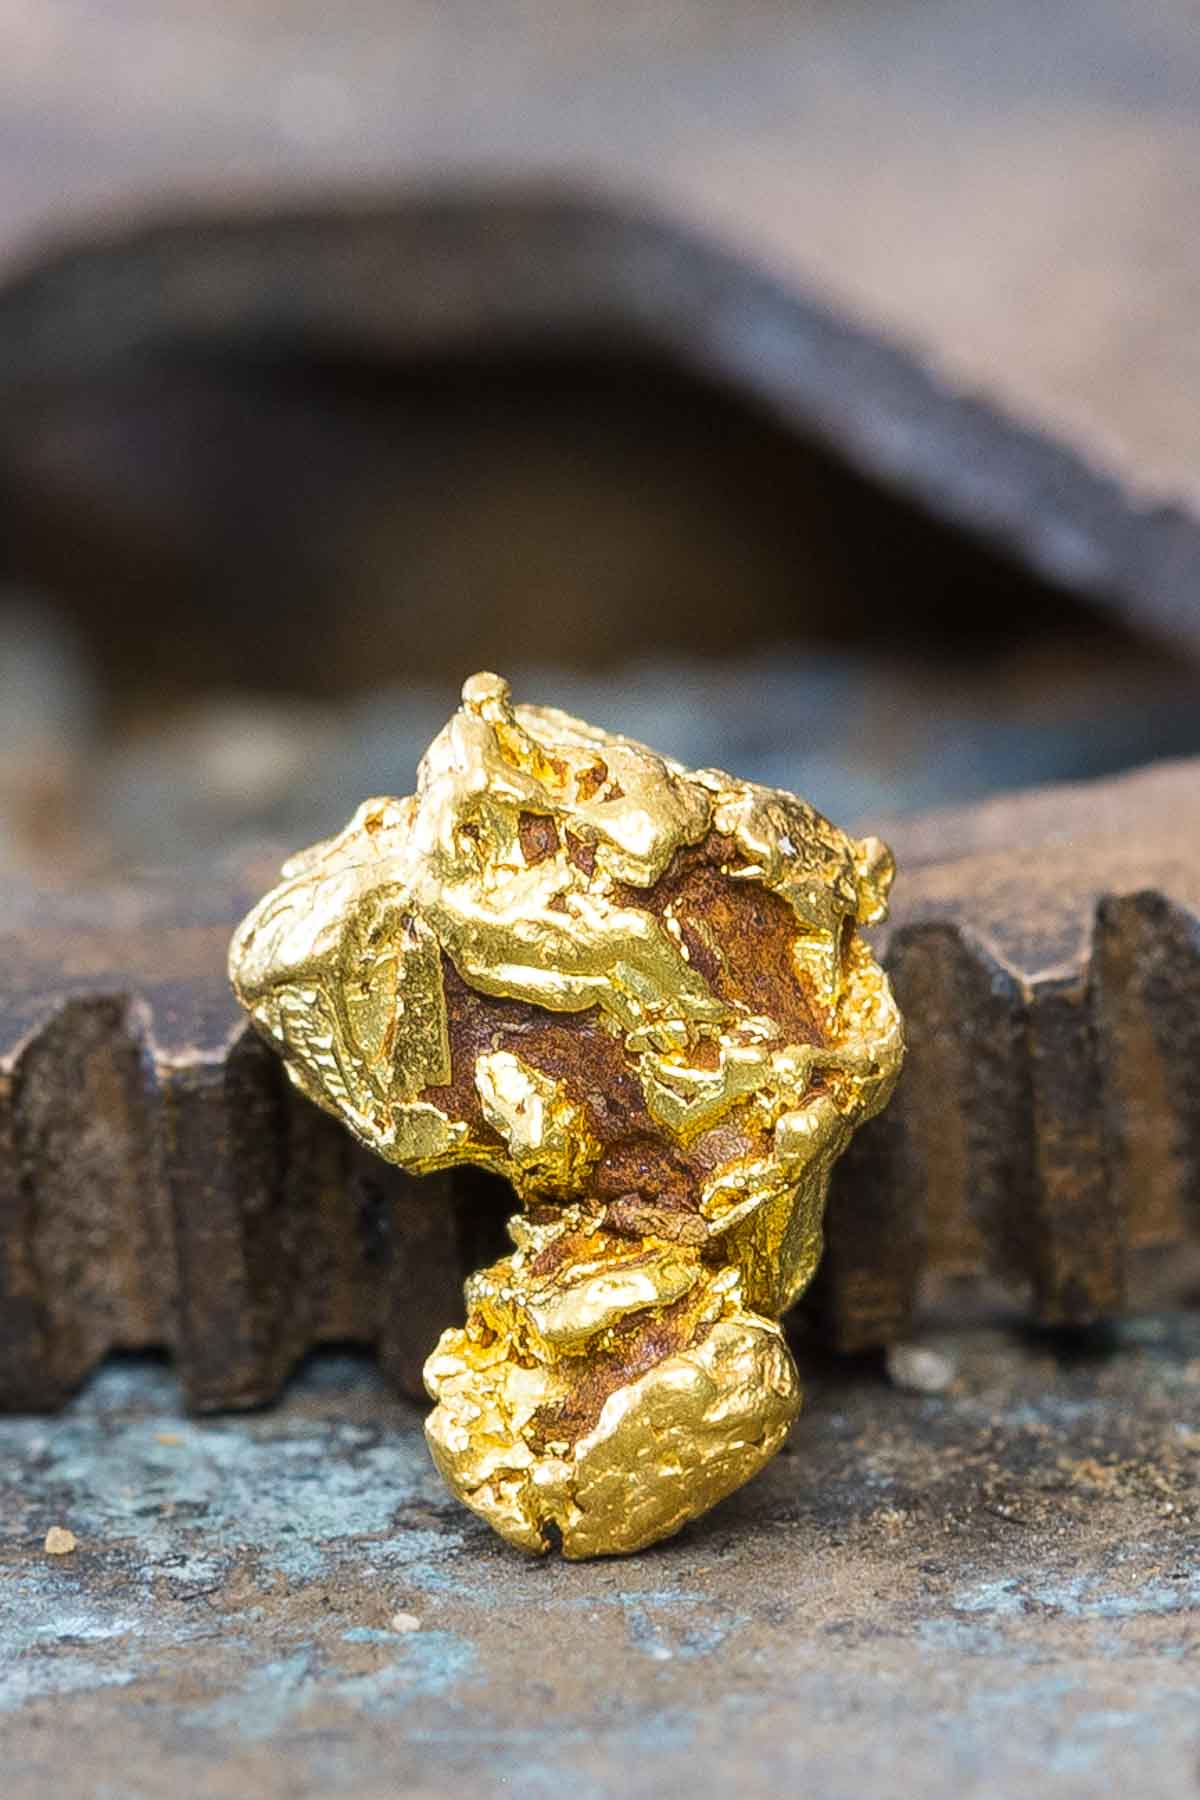 "S" Curved Natural Gold Nugget from Park County, Colorado